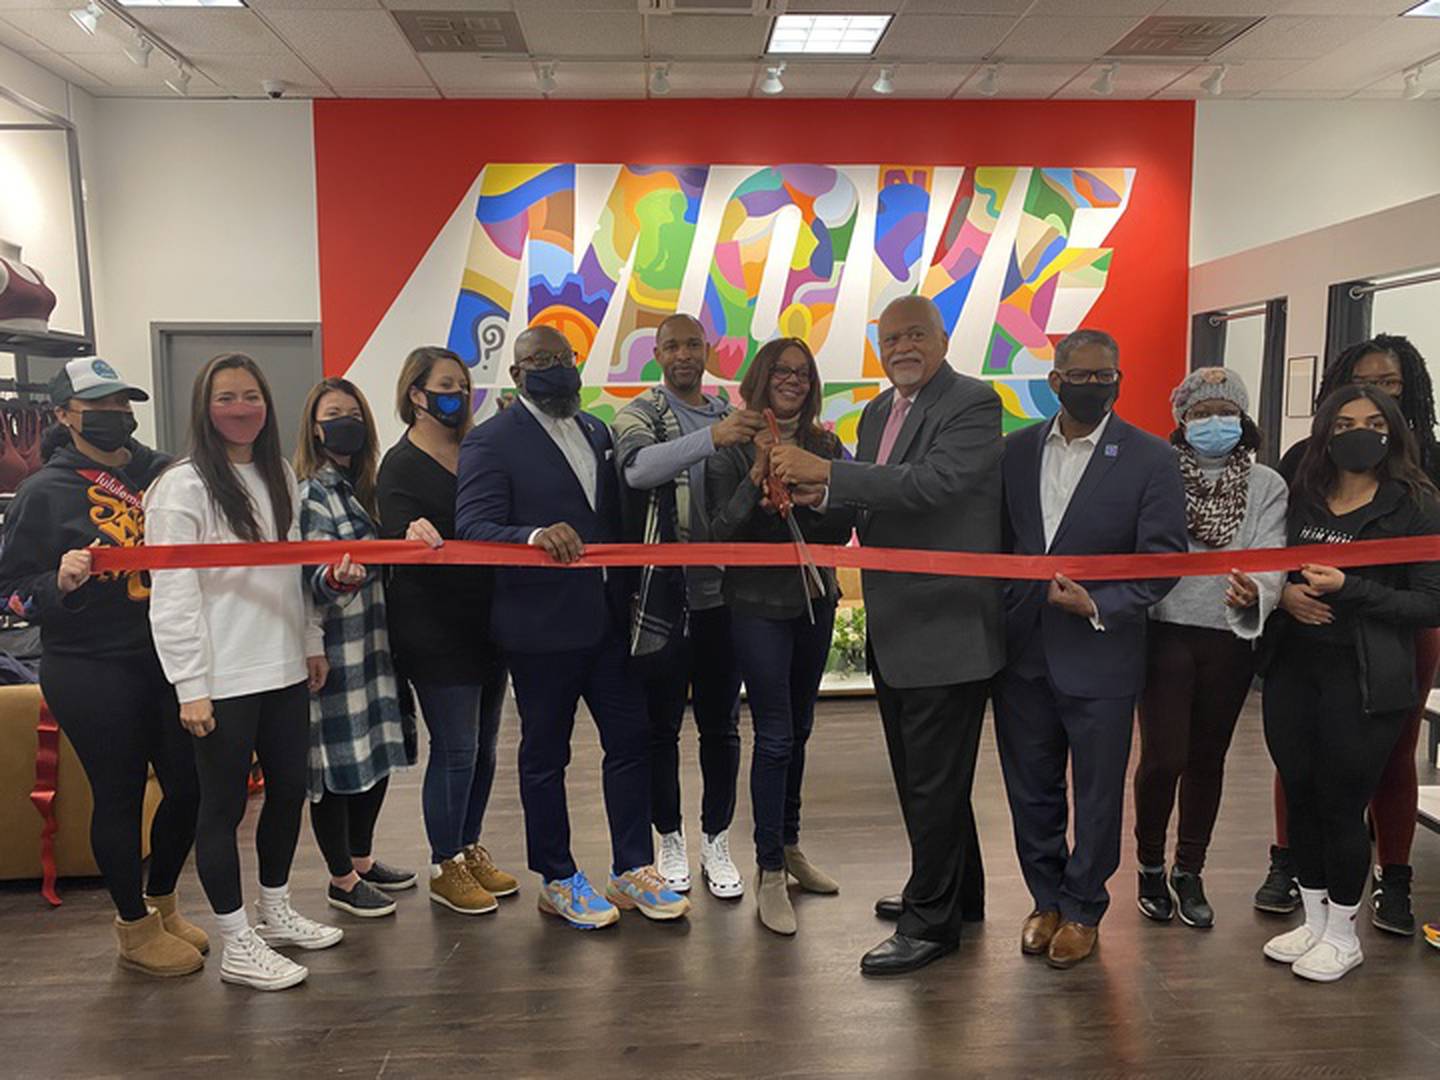 Lululemon Hyde Park store employees, including general manager Michael "Muffy" Collins (center) pose for a ribbon cutting alongside Hyde Park city's chamber of commerce members.